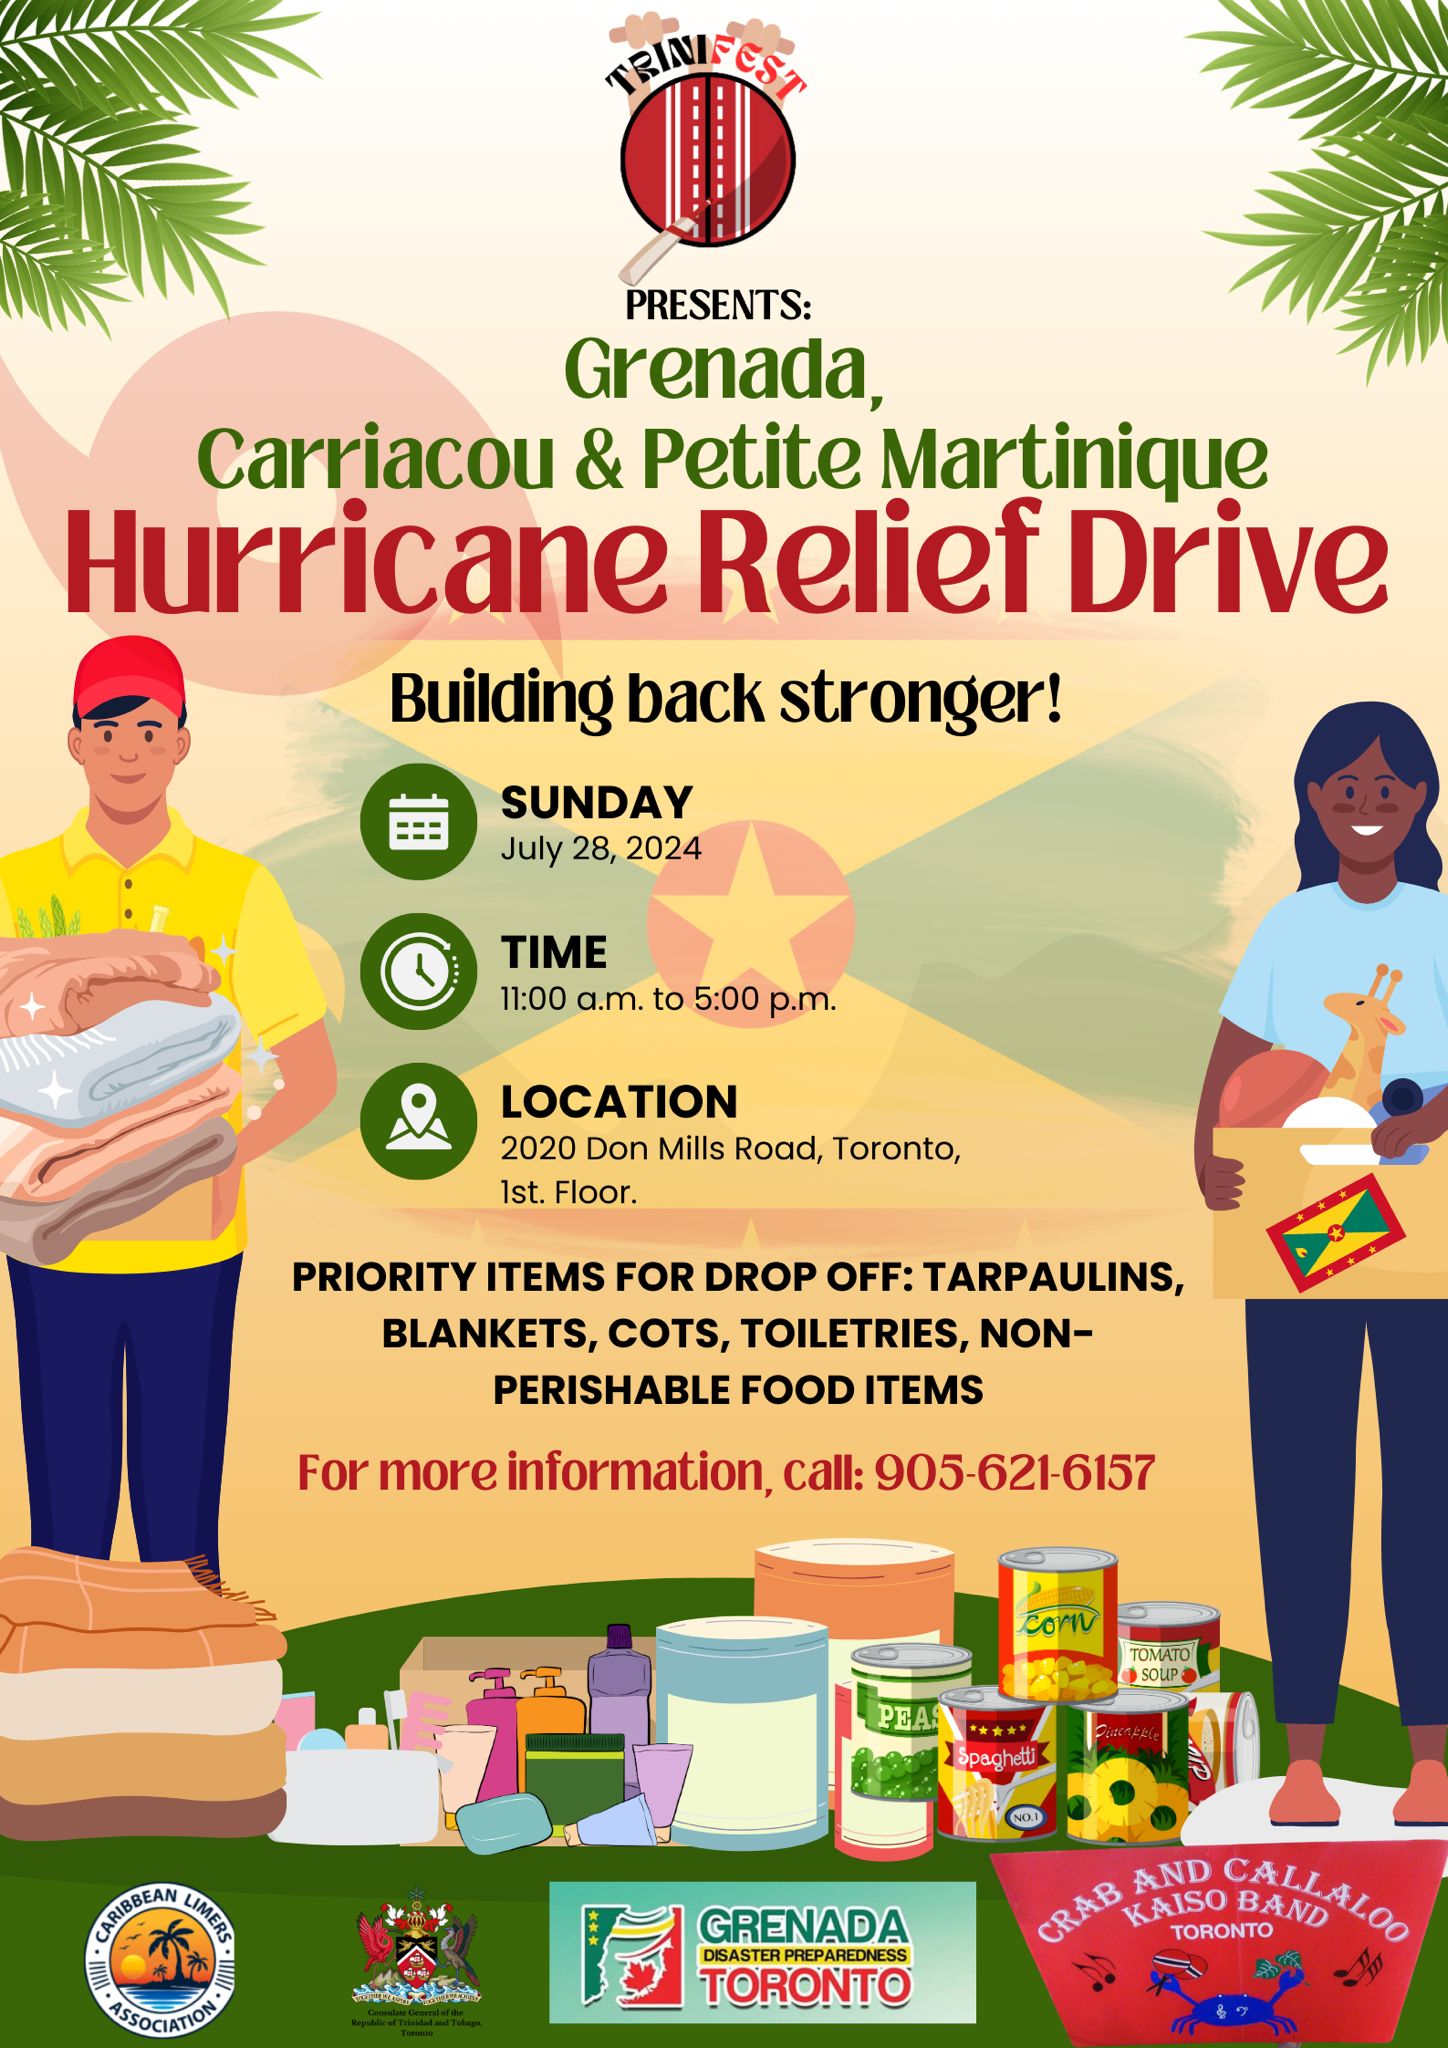 Hurricane Relief Drive for Grenada, Carriacou and Petite Martinique - Sunday, July 28, 2024